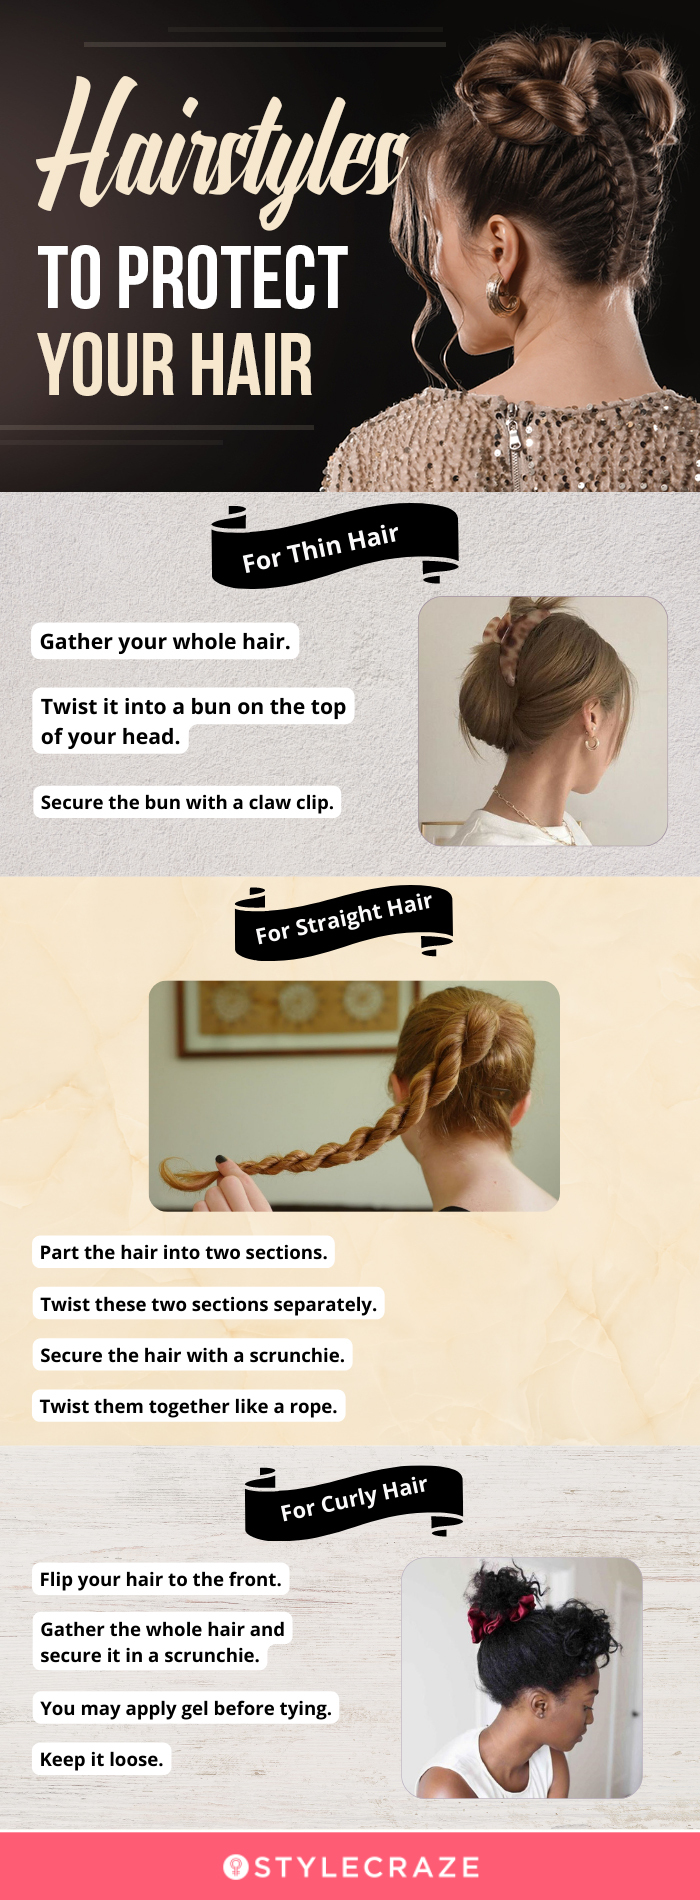 hairstyles to protect your hair [infographic]